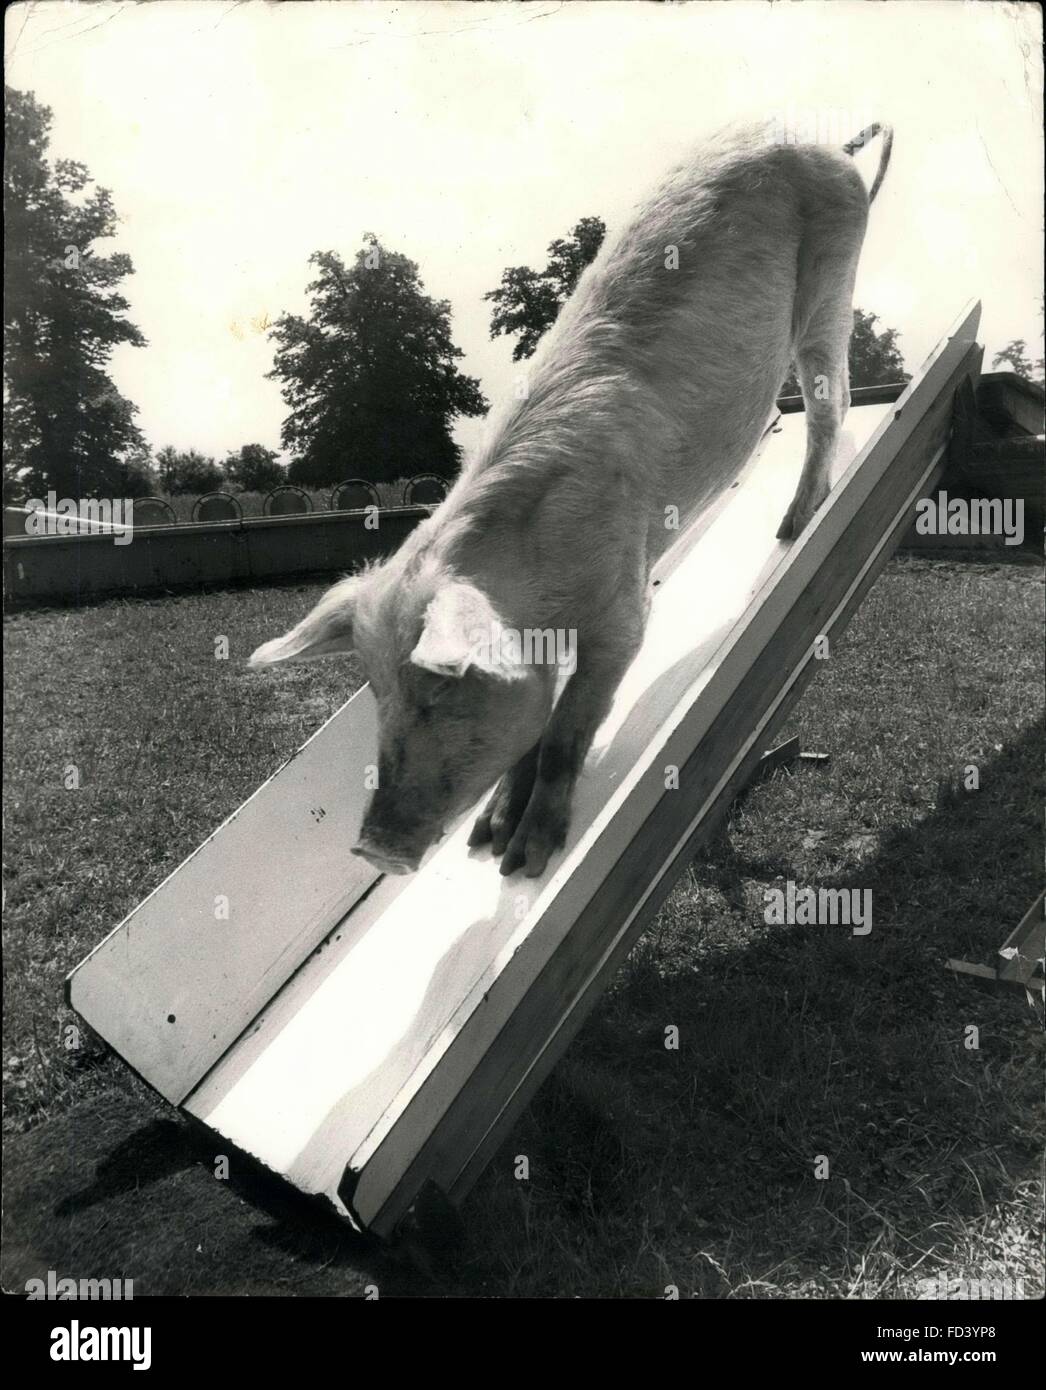 1962 - Pigs To The Rescue; The traditional St. Bernard mountain-rescue dog with a brandy barrel around its neck has a rival. Circus owner Michael Hirst from Wilshire has trained a groupe of pigs to perform rescue duties, including climbing and sliding down slippery slopes. Pigs are obstinate animals and difficult to train, but Heide here is able to walk obediently on leach and follow her karb drill. Photo Shows Bacon slider; Heidi shows how she can negotiate a slippery slope. © Keystone Pictures USA/ZUMAPRESS.com/Alamy Live News Stock Photo